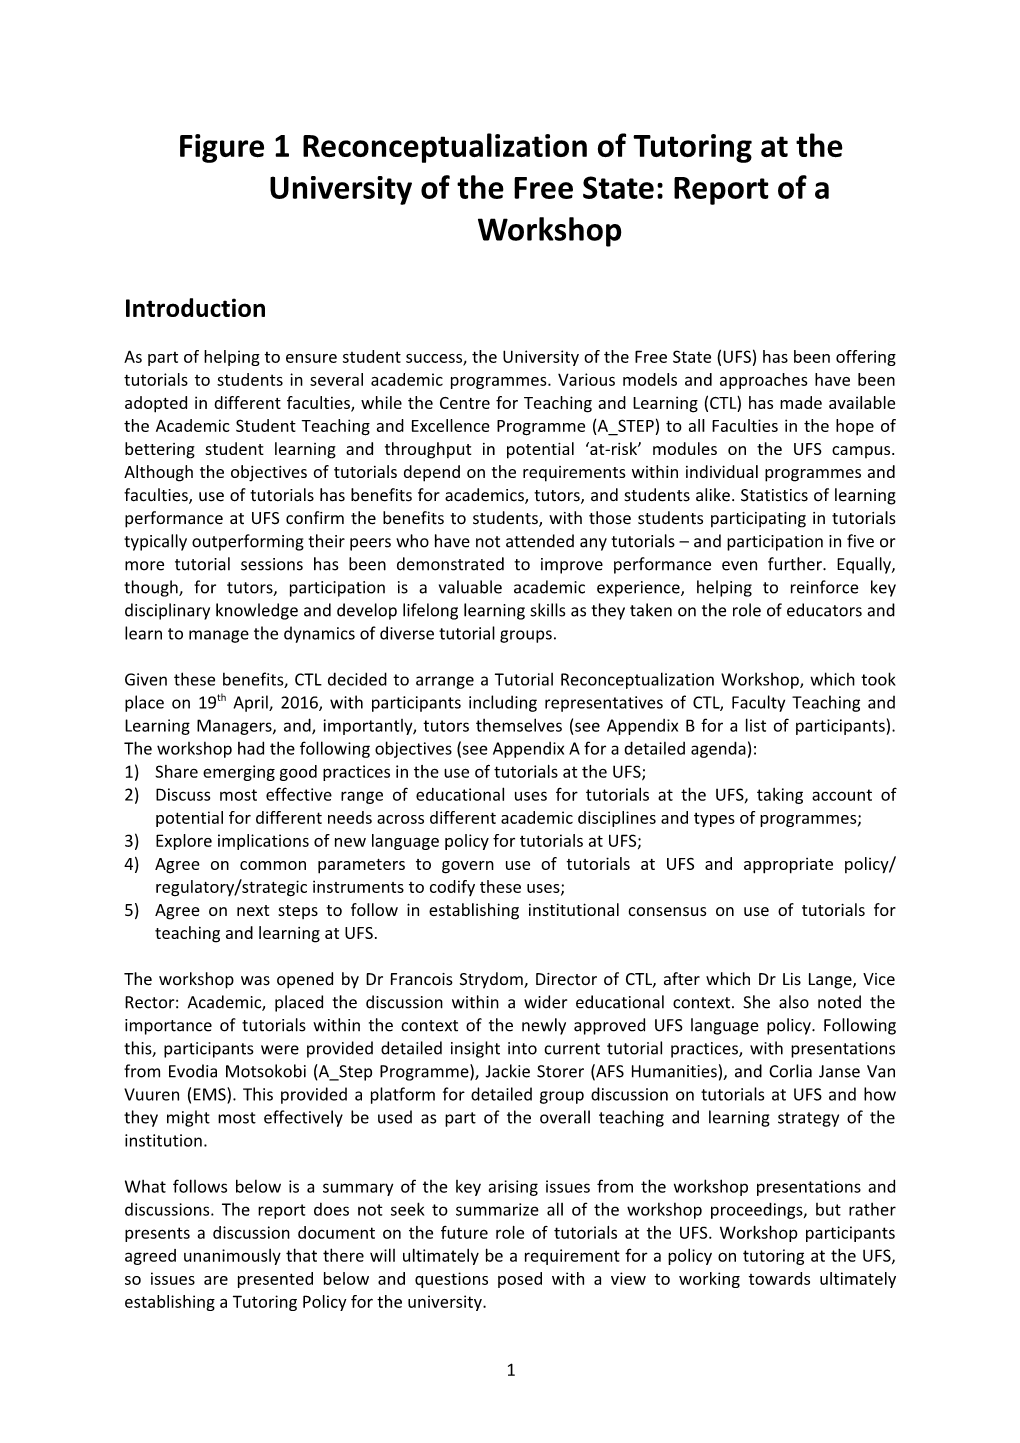 Reconceptualization of Tutoring at the University of the Free State: Report of a Workshop